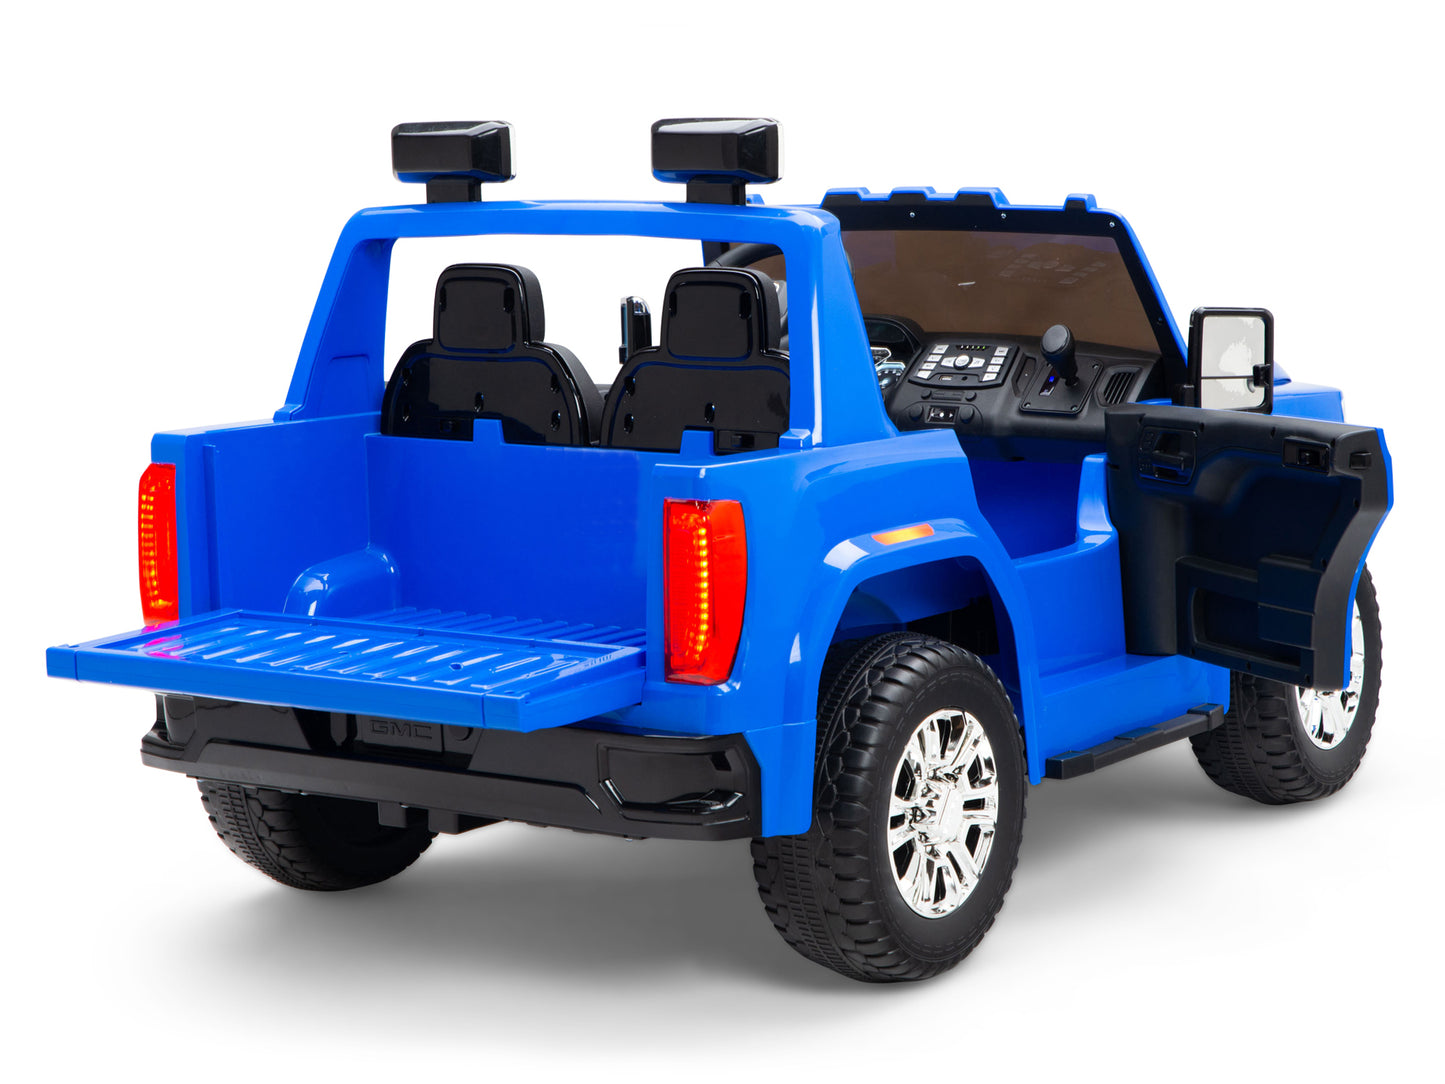 12V GMC Sierra Denali Kids Electric Ride On Truck with Remote Control - Blue